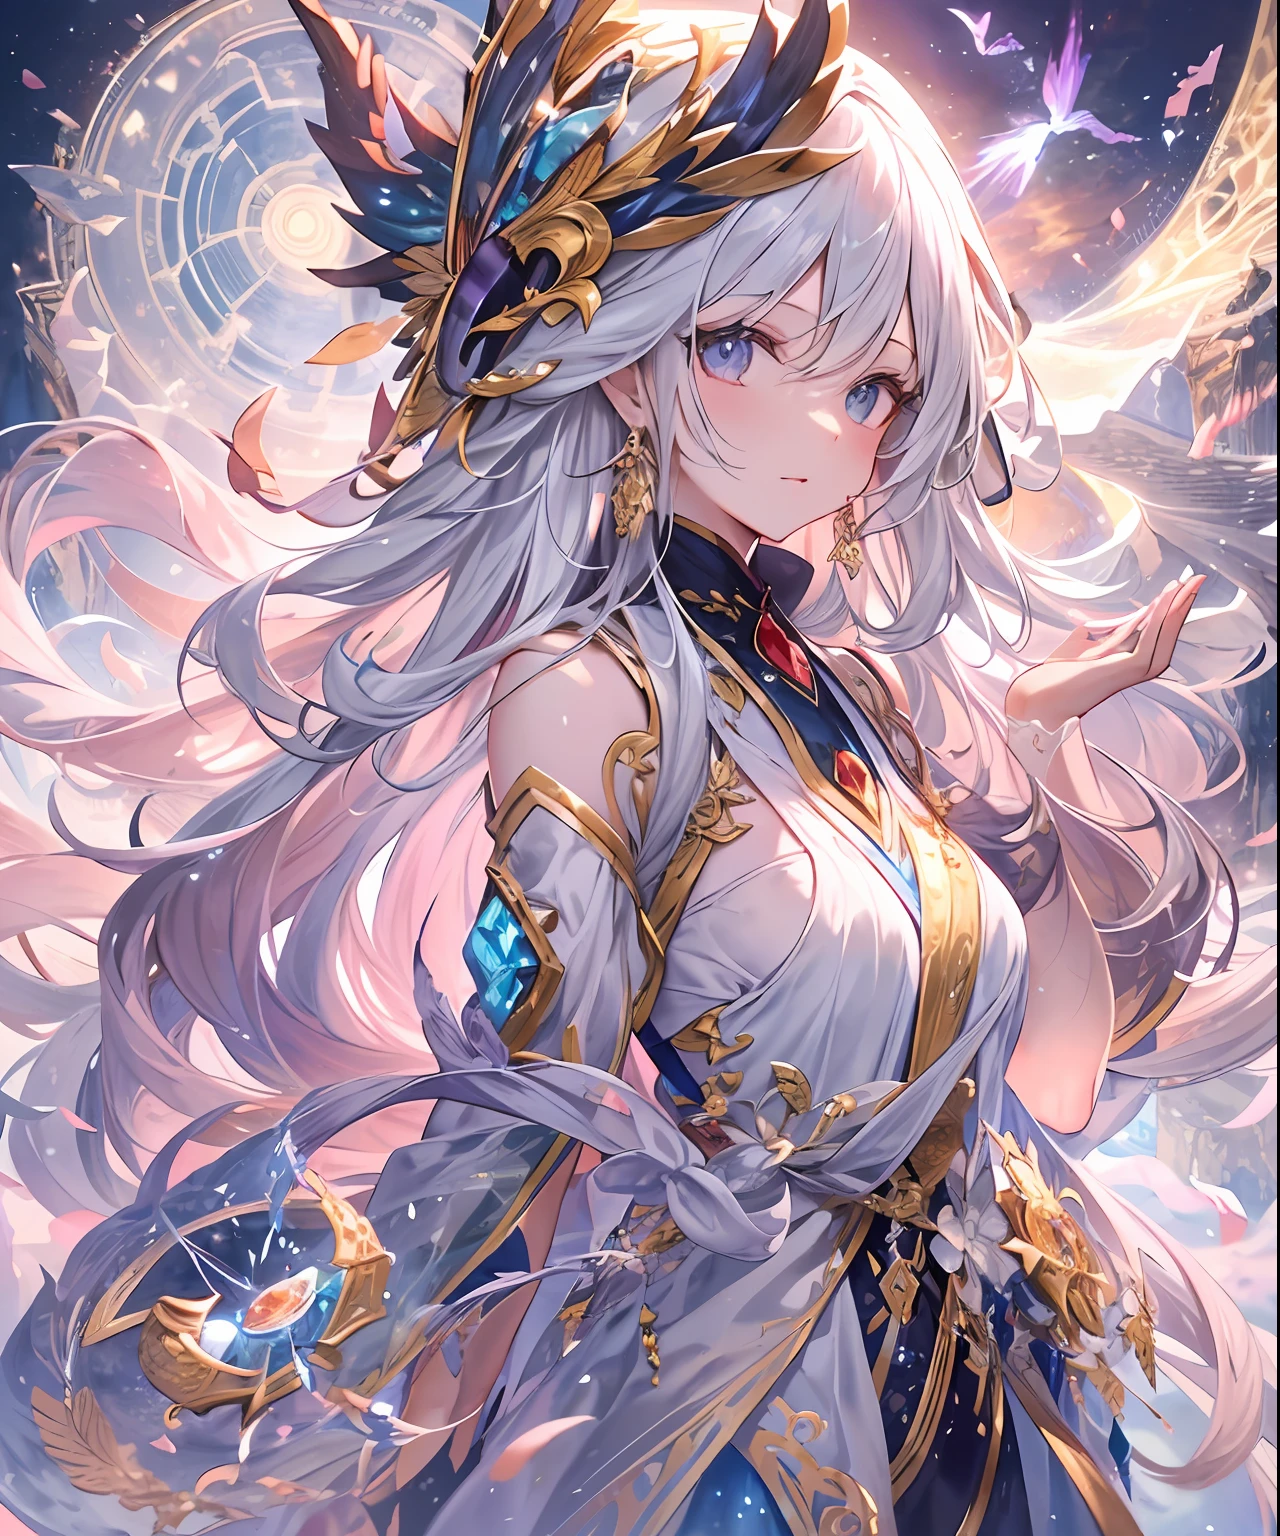 (((​masterpiece)))、(((top-quality)))、((Ultra-detail))、(illustratio)、((extremely delicate and beautiful))、、Bright smile、floating、Light purple hair、(Detailed light) (1girl in)、、solo、The long-haired、The wind is blowing、A WORLD、（cute eye）、Create a mesmerizing fantasy art image depicting a powerful magician standing on an eroded towering rock. Rocks should be placed on the edge of a high cliff, Provides magicians with breathtaking views of mysterious landscapes. A scene that unfolds against the backdrop of majesty, Snow-capped mountains as far as the eye can see々々. These towering peaks are、Should be shrouded in ethereal mist.., Add an air of mystery to the stage. The mountain should rise dramatically from the lower valley, That peak that delimits the horizon. In the sky, Unleash your imagination with the presence of majestic dragons that rise gracefully. These dragons are、Must be rendered with impressive detail., Their scale is、Soak up the sunshine while dancing in the clouds. These creatures are not terrifying, Rather an integral part of the world, Exudes a sense of power and wisdom. The magician himself stands tall and majestic, Wrapped in a robe fluttering in the wind. Your Staff, Complex runic engravings, Hold firmly with one hand, And the other hand is stretched towards the mountains, As if channeling the magic of the earth itself. Its length is, The beard and loose hair give him an aura of timeless wisdom, May his eyes shine with otherworldly knowledge. As the sun casts warm tones on the landscape, Capture the moment when the world seems to hold its breath in awe of the mysterious convergence of magic., naturey, And amazing creatures. The artistic style of this image is、Details must be rich., Show me the intricate design of the magician's robe, Rock layer texture, Dragon scales glow, And the play of light in the mountains.